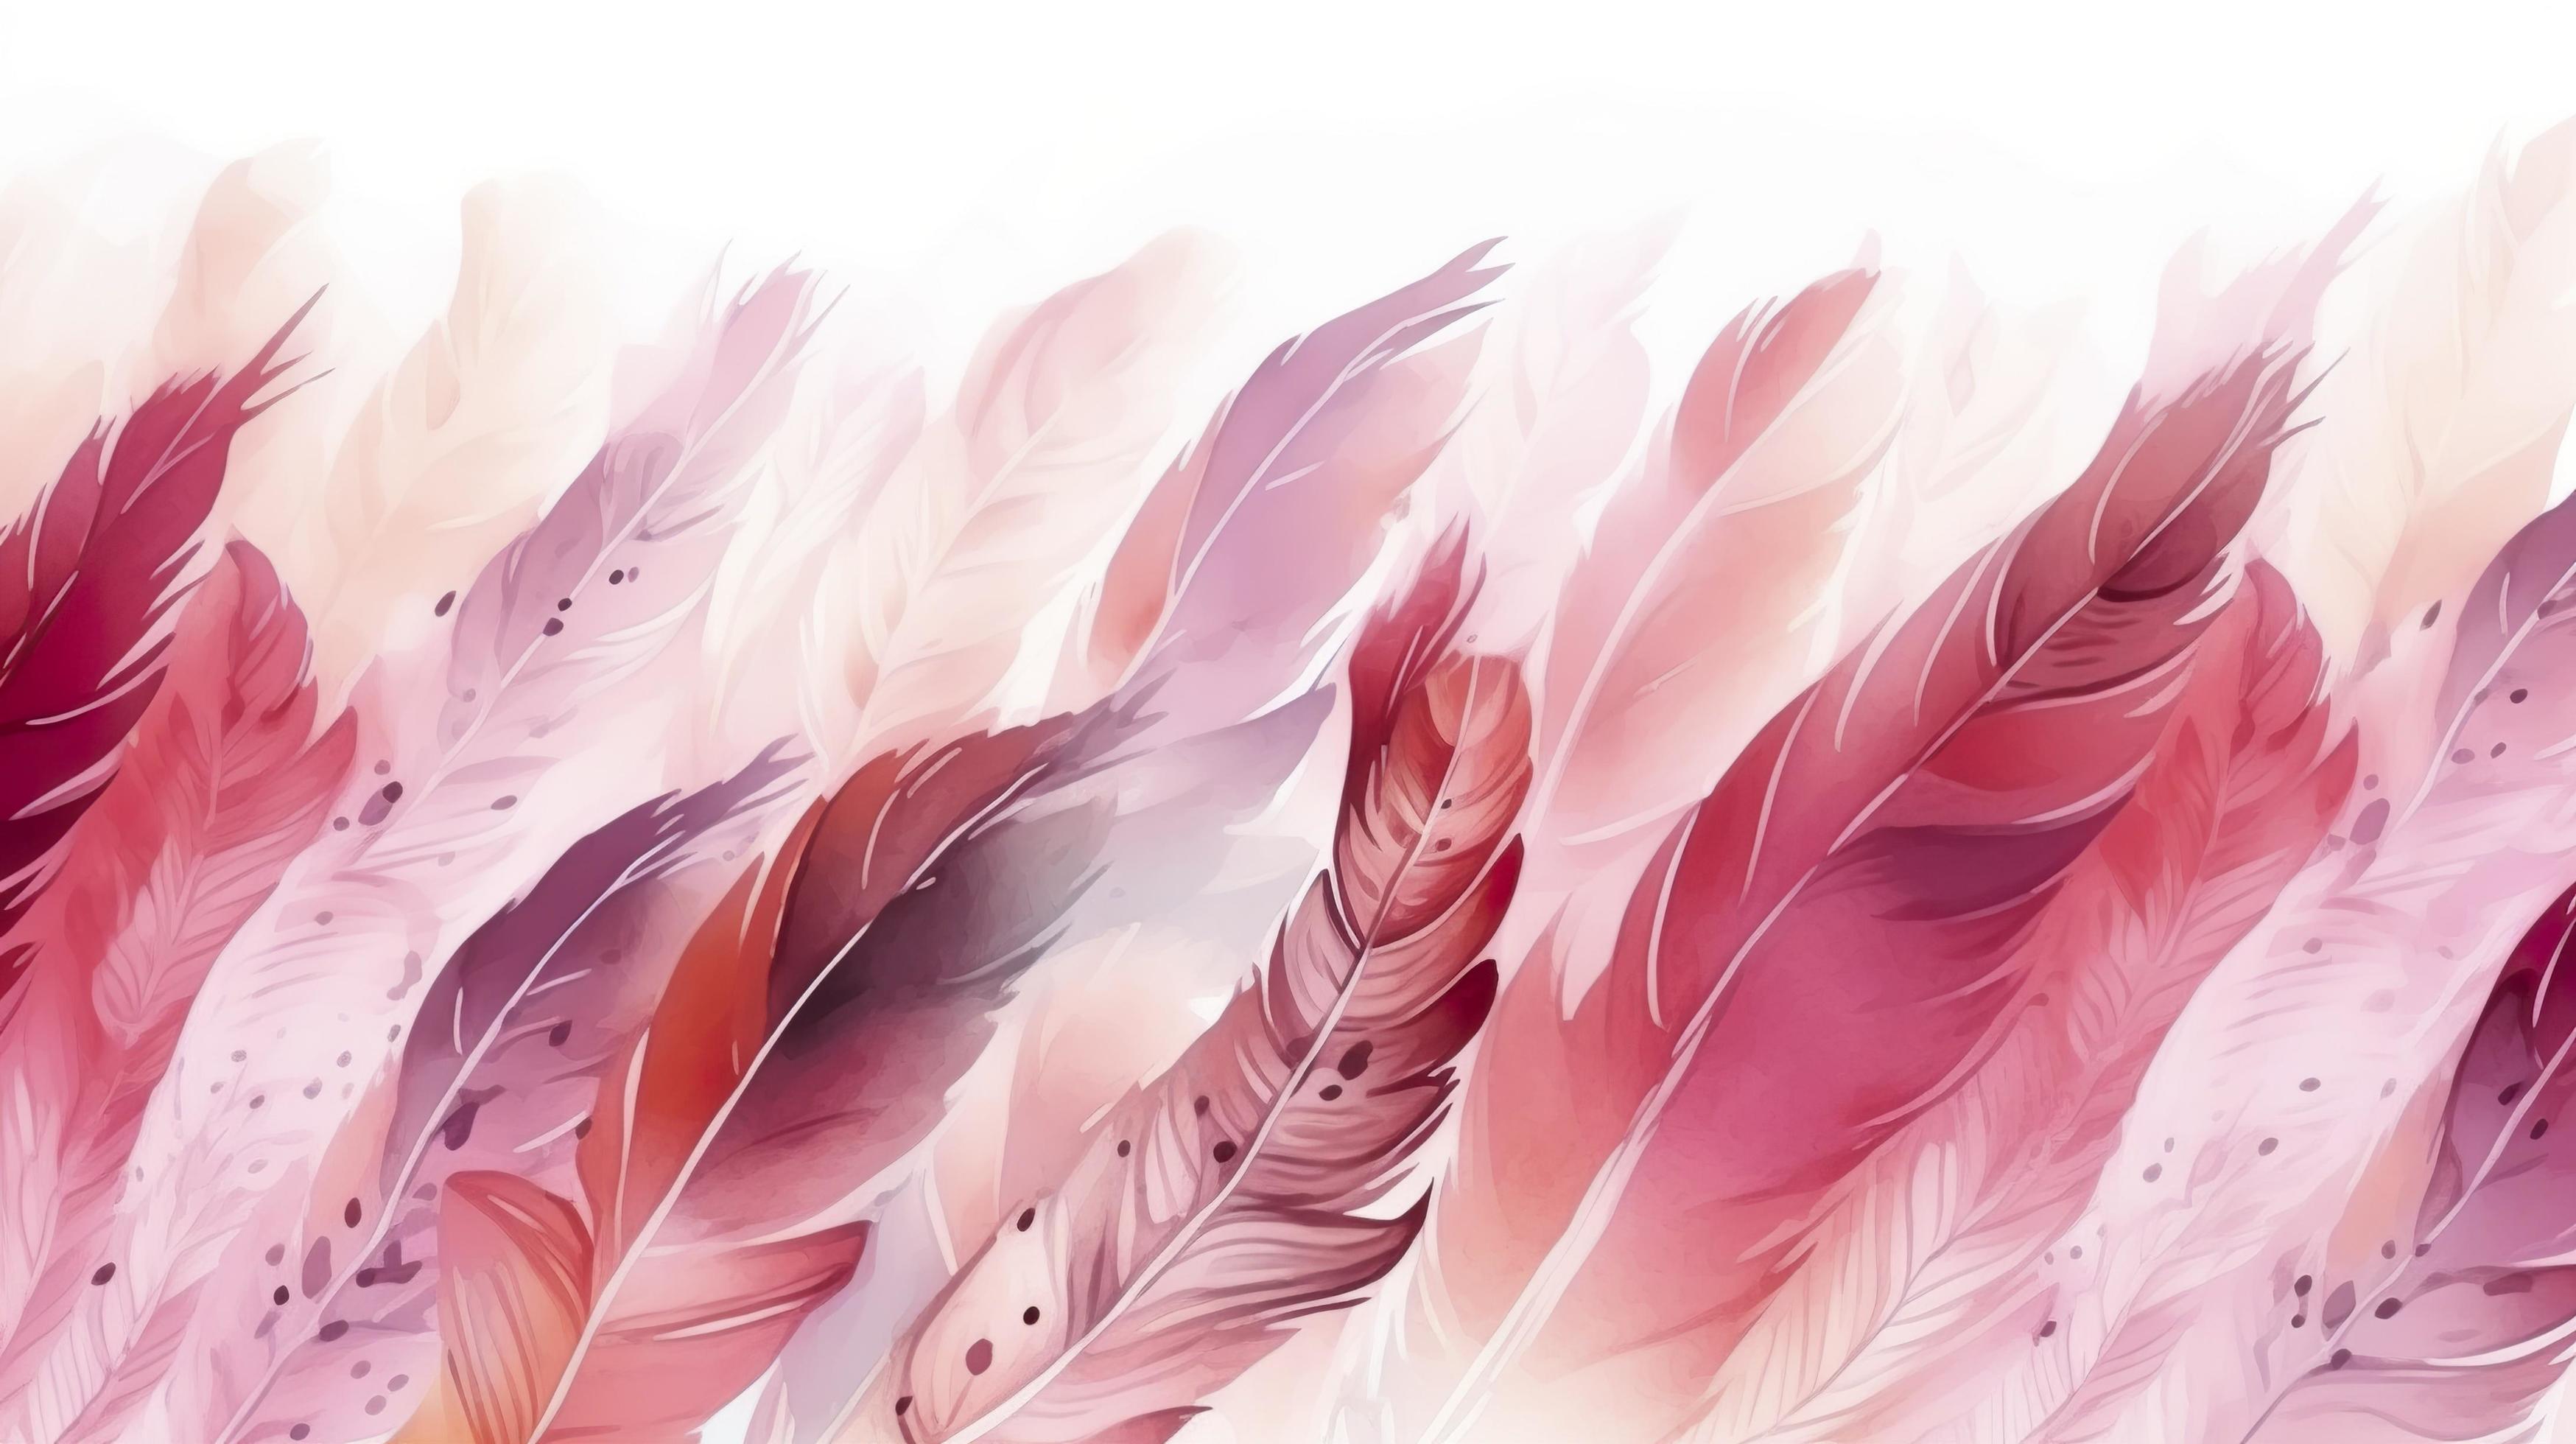 coloured feathers in pink on the background, in the style of subtle shading, anime aesthetic, wallpaper, pigeoncore, free brushwork, translucent color